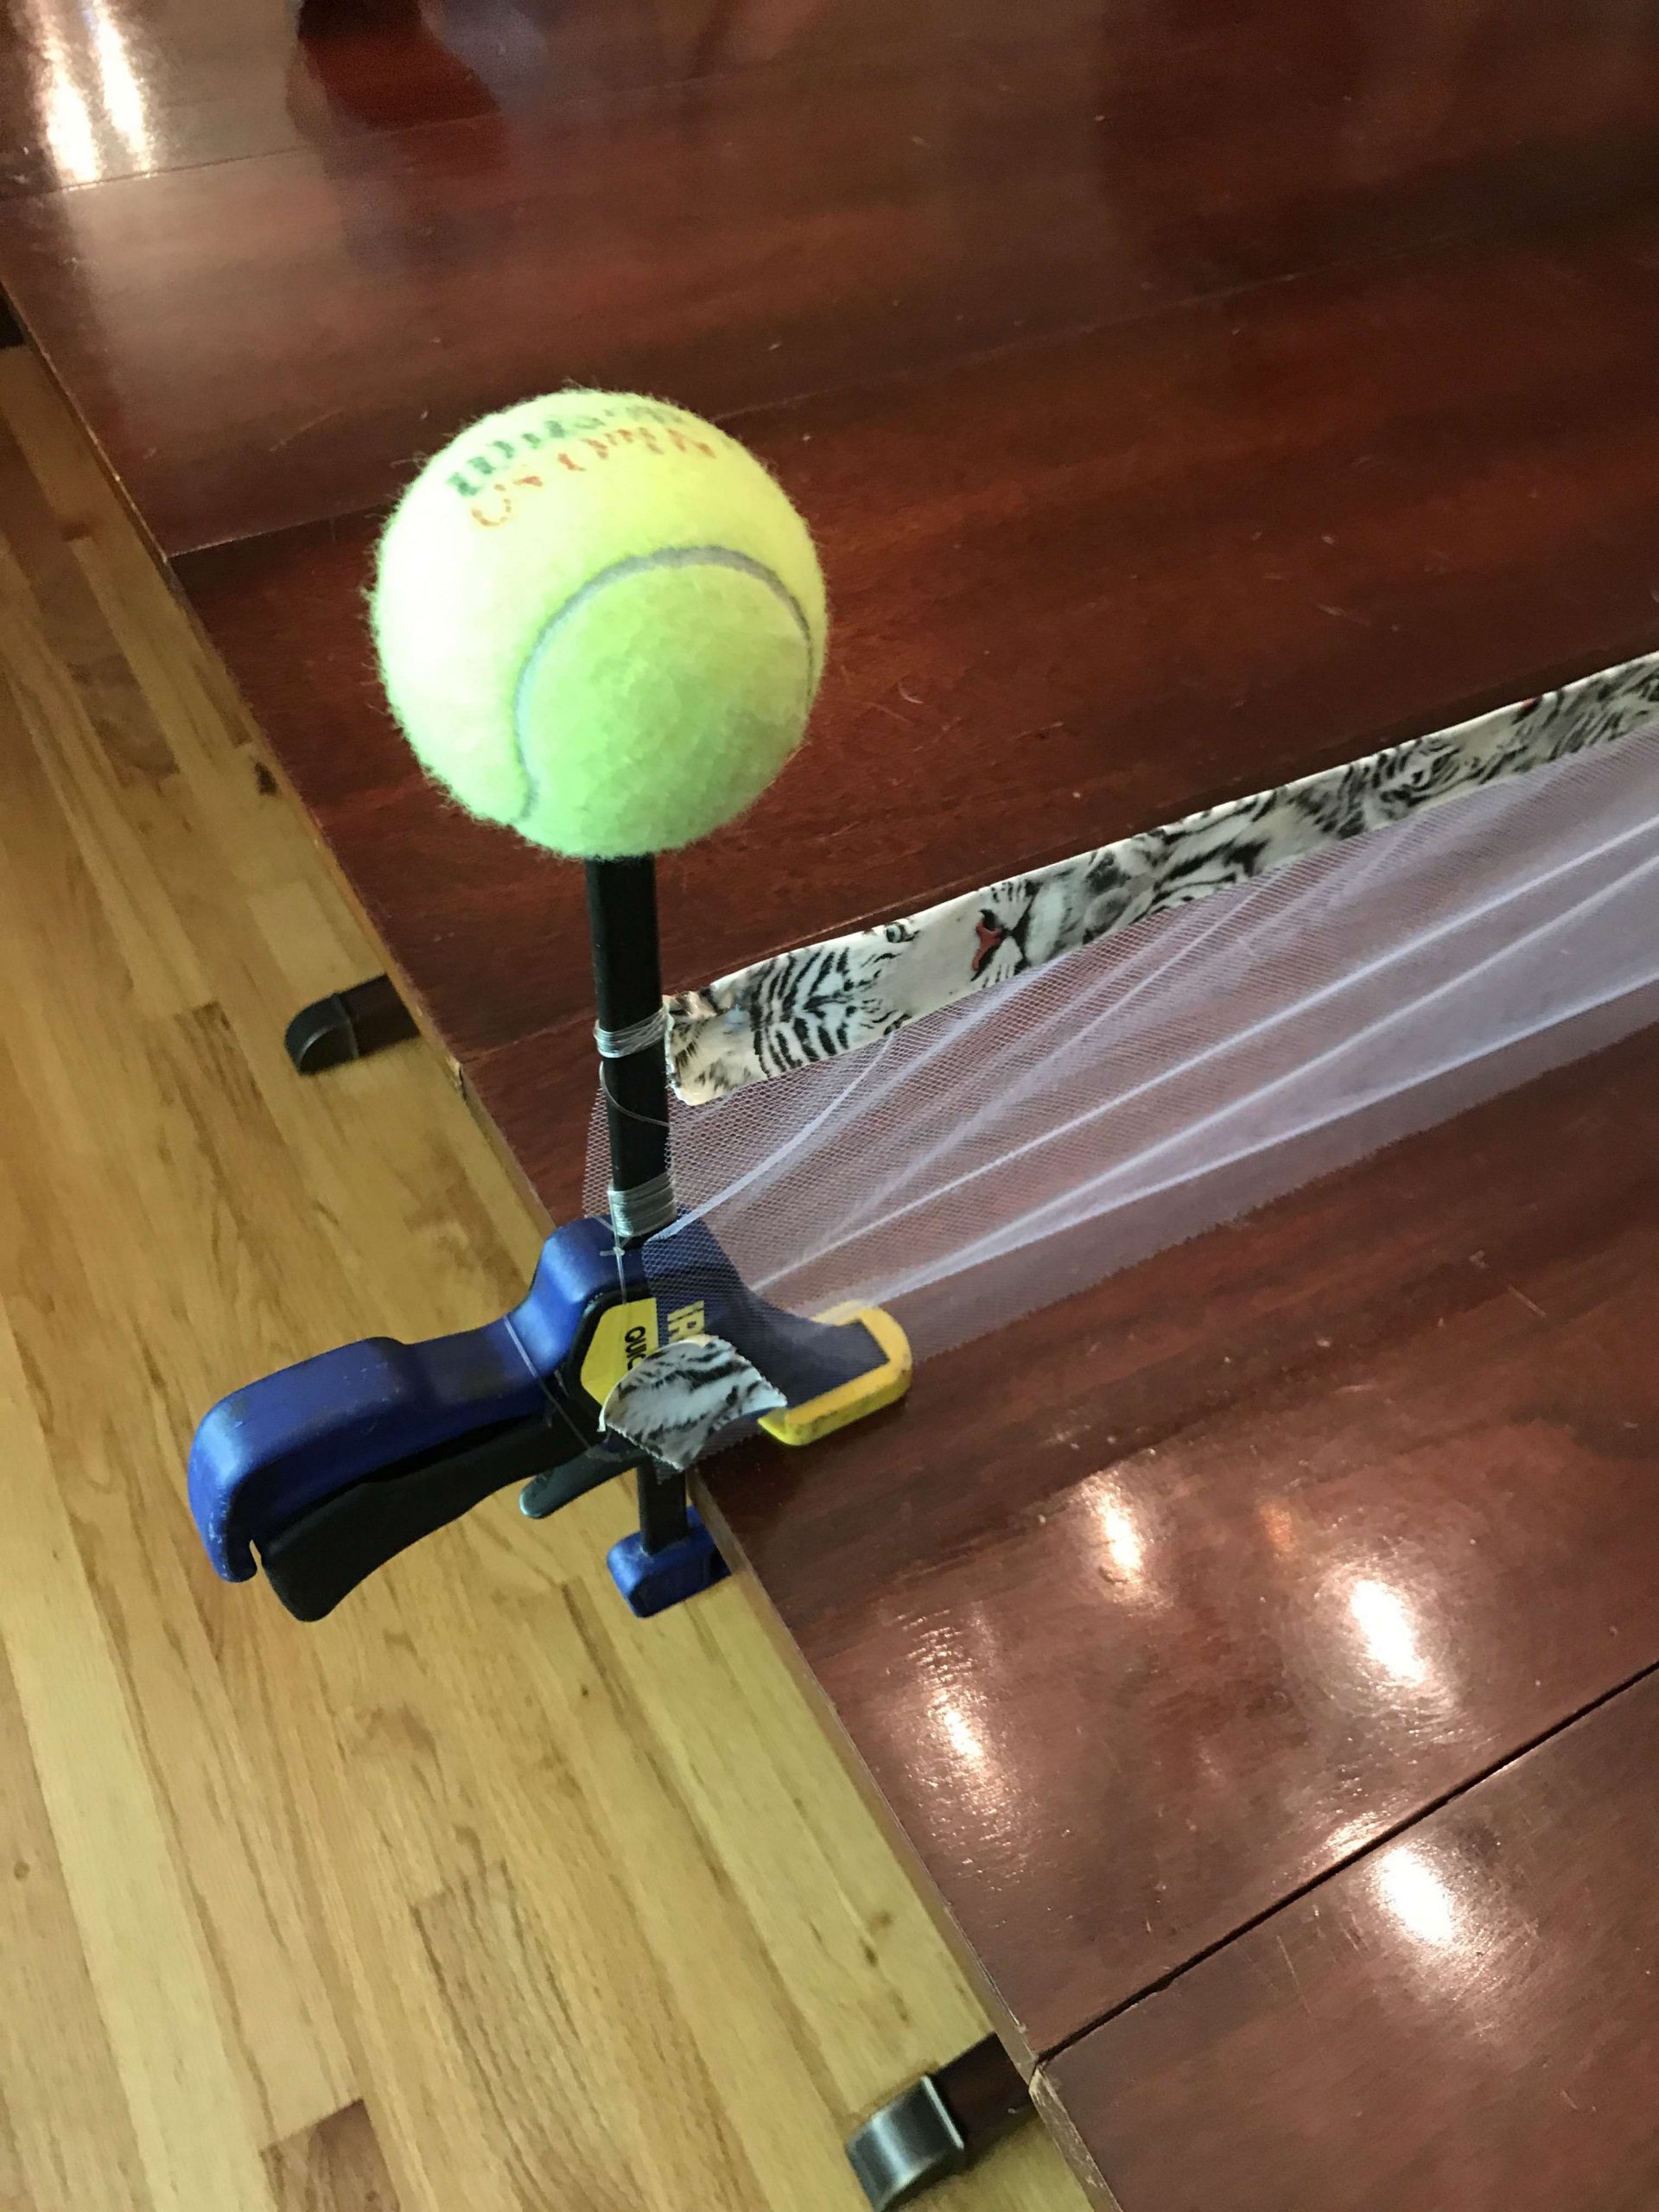 Helping the kids, Steve engineered a net on the dining room table with stuff from around the house â tulle (netting) from a wedding shower, clamps, fishing line and duct tape. Tennis balls were added for safety.